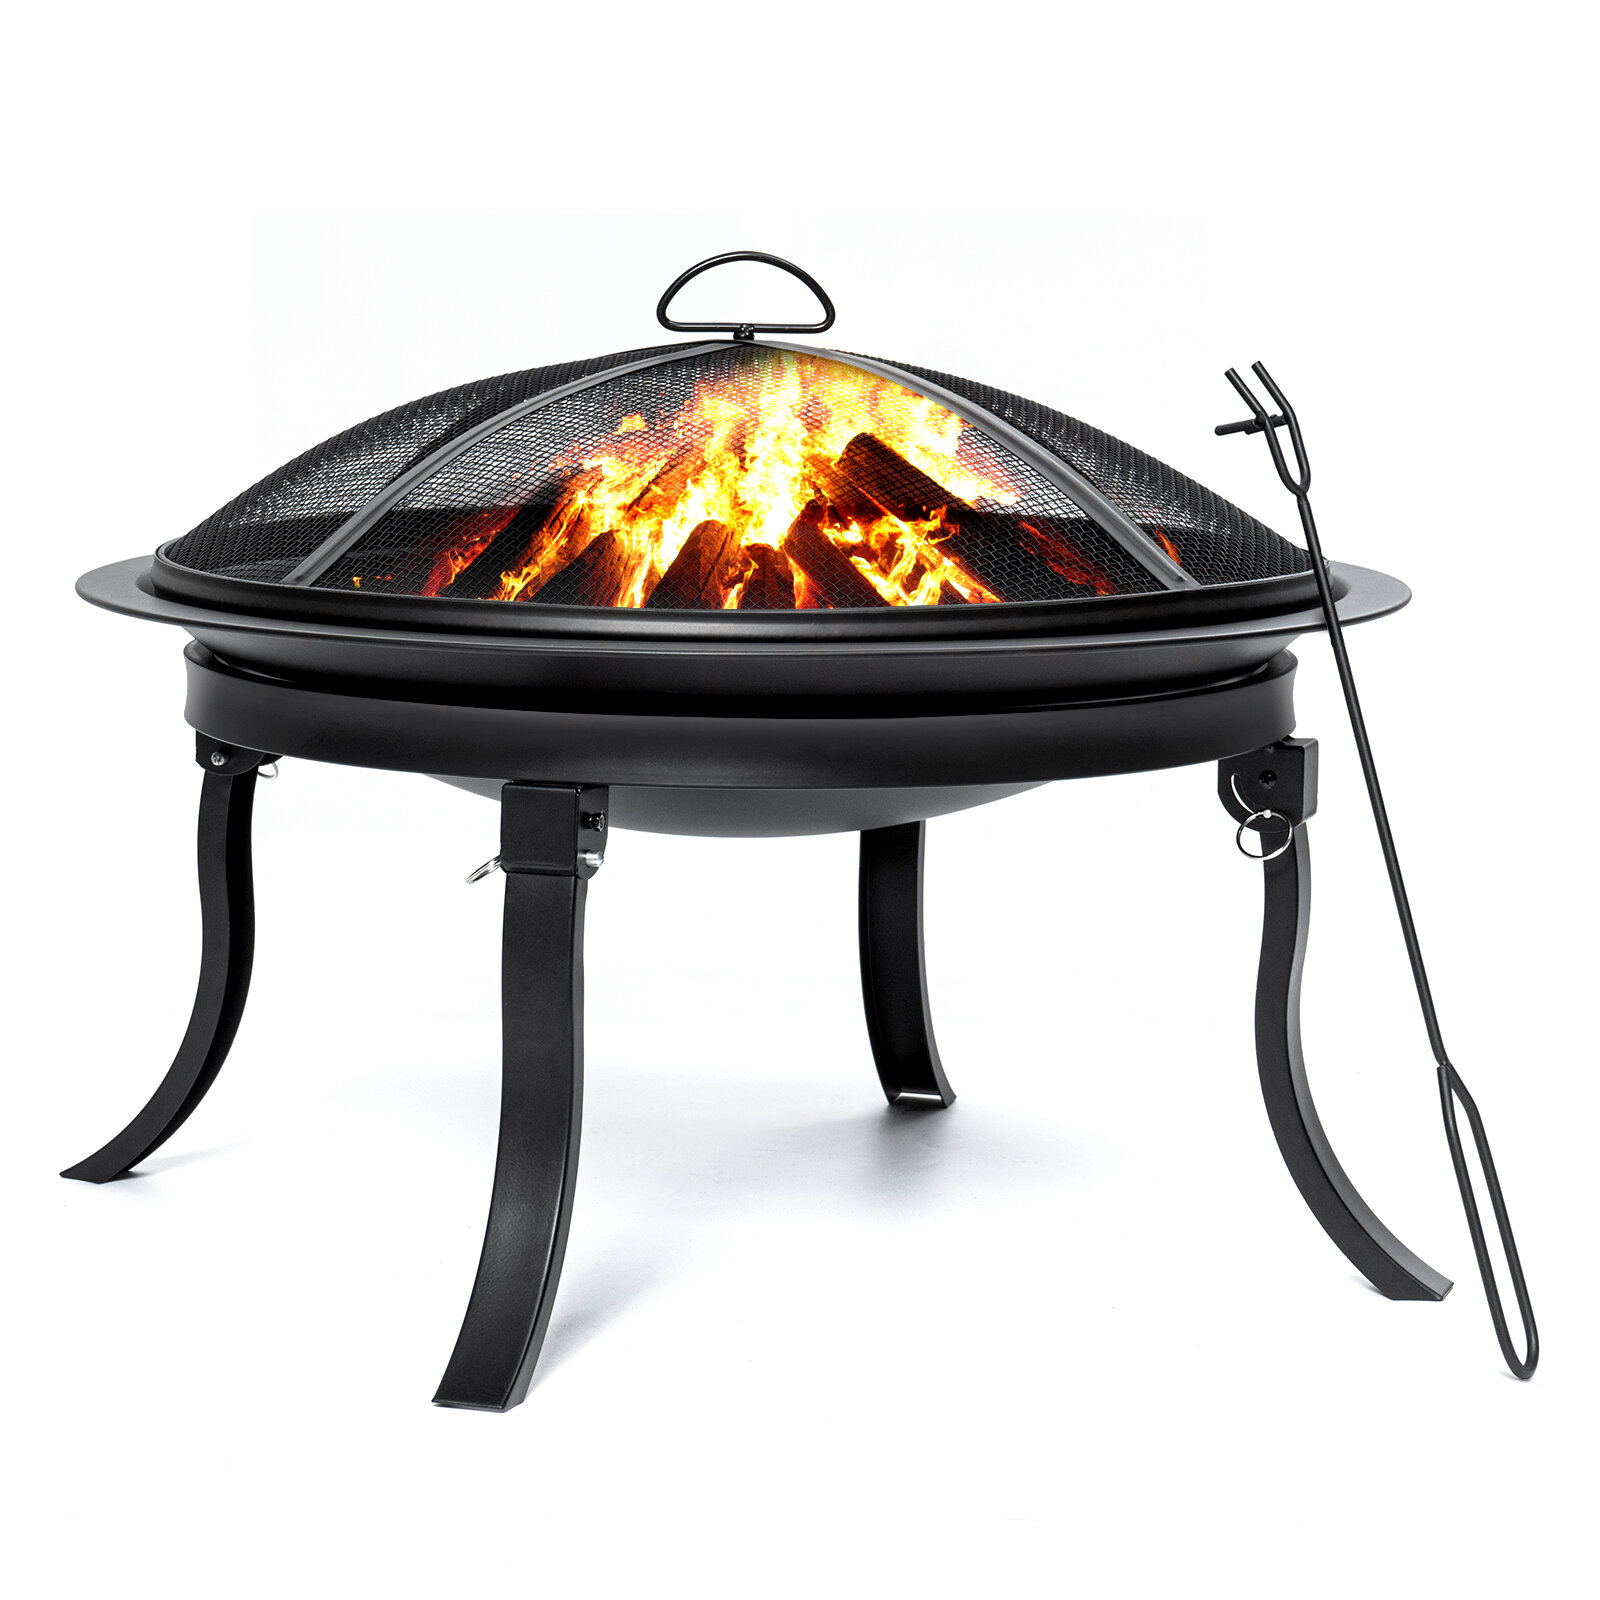 Bbq Grill Fire Bowl For Outdoor Camping, Burning Earth Fire Pit